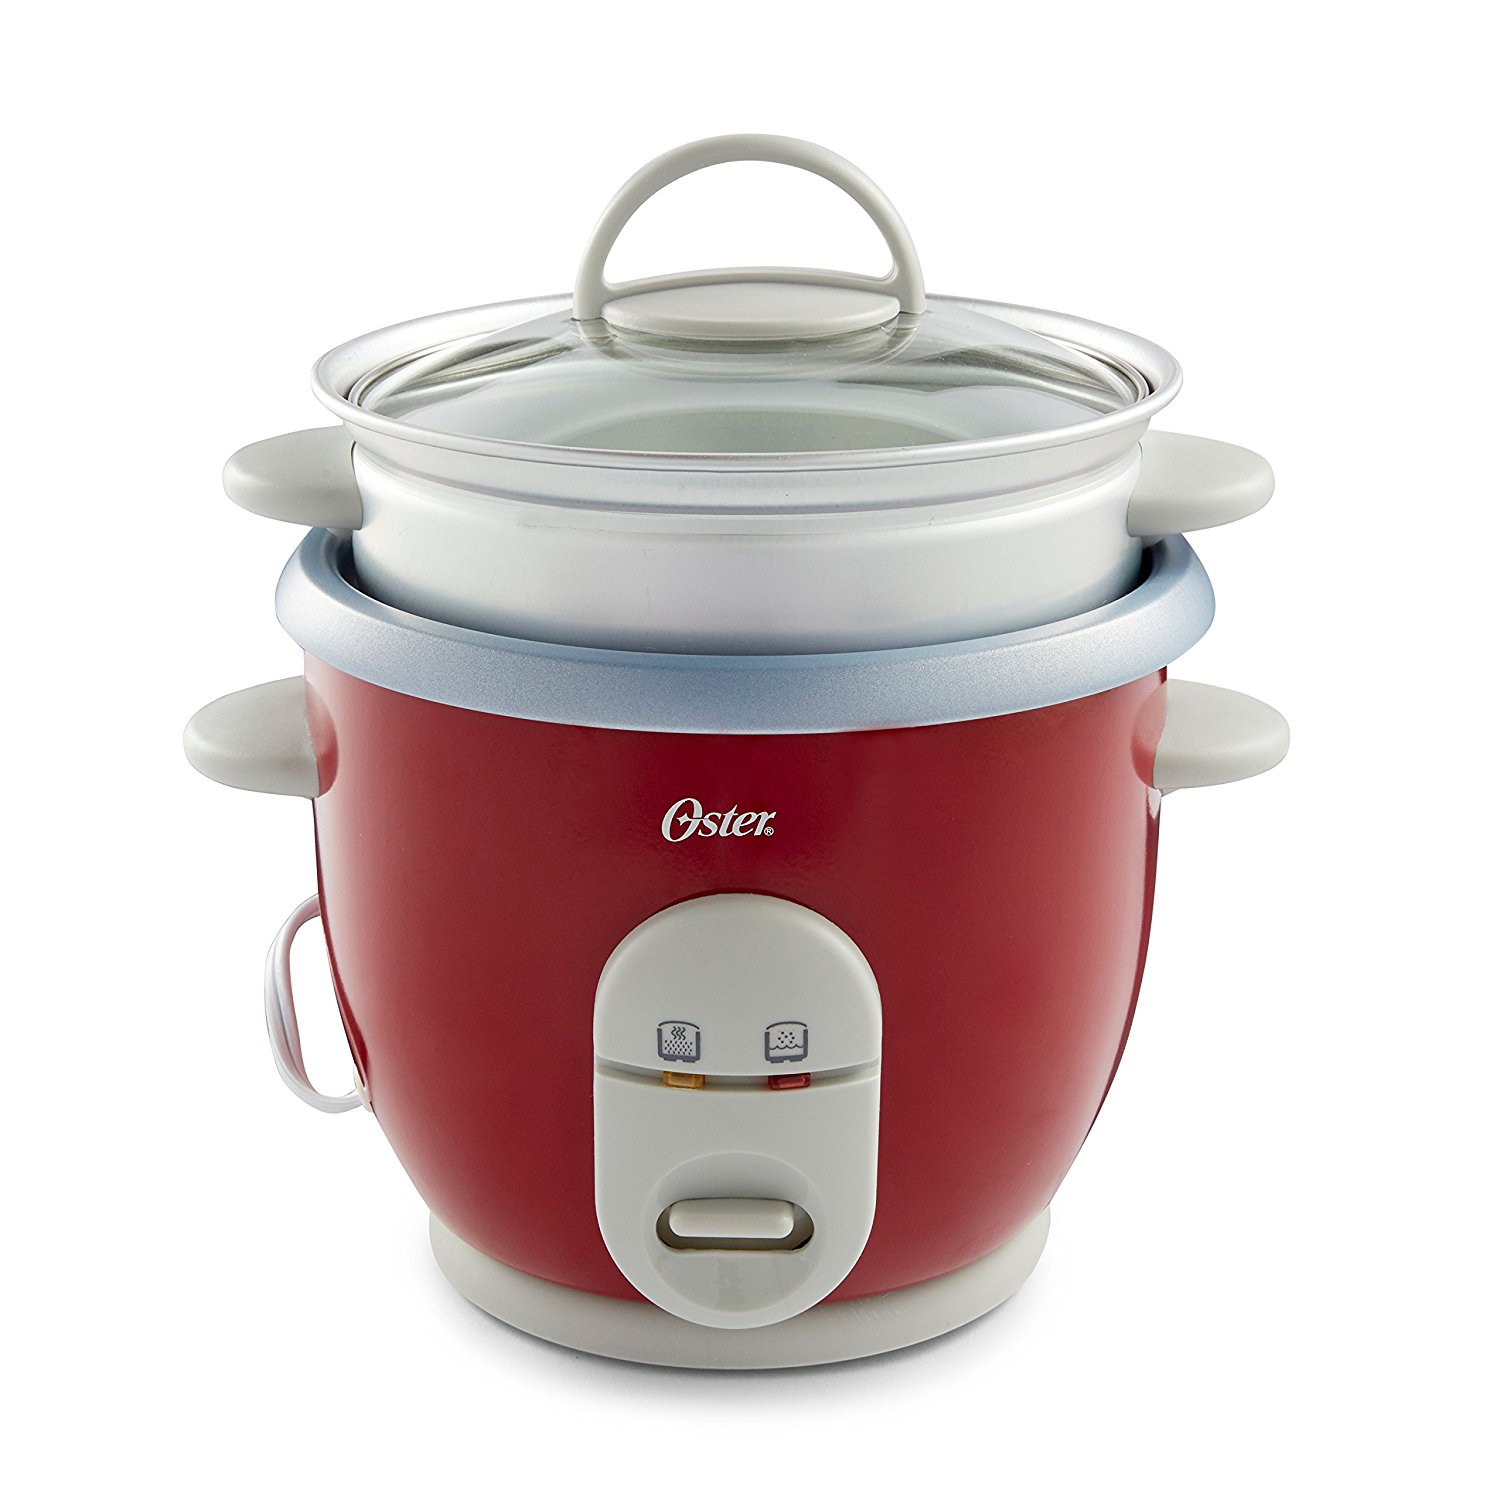 Oster 6-Cup Rice Cooker and Steamer, 4722 - image 1 of 6